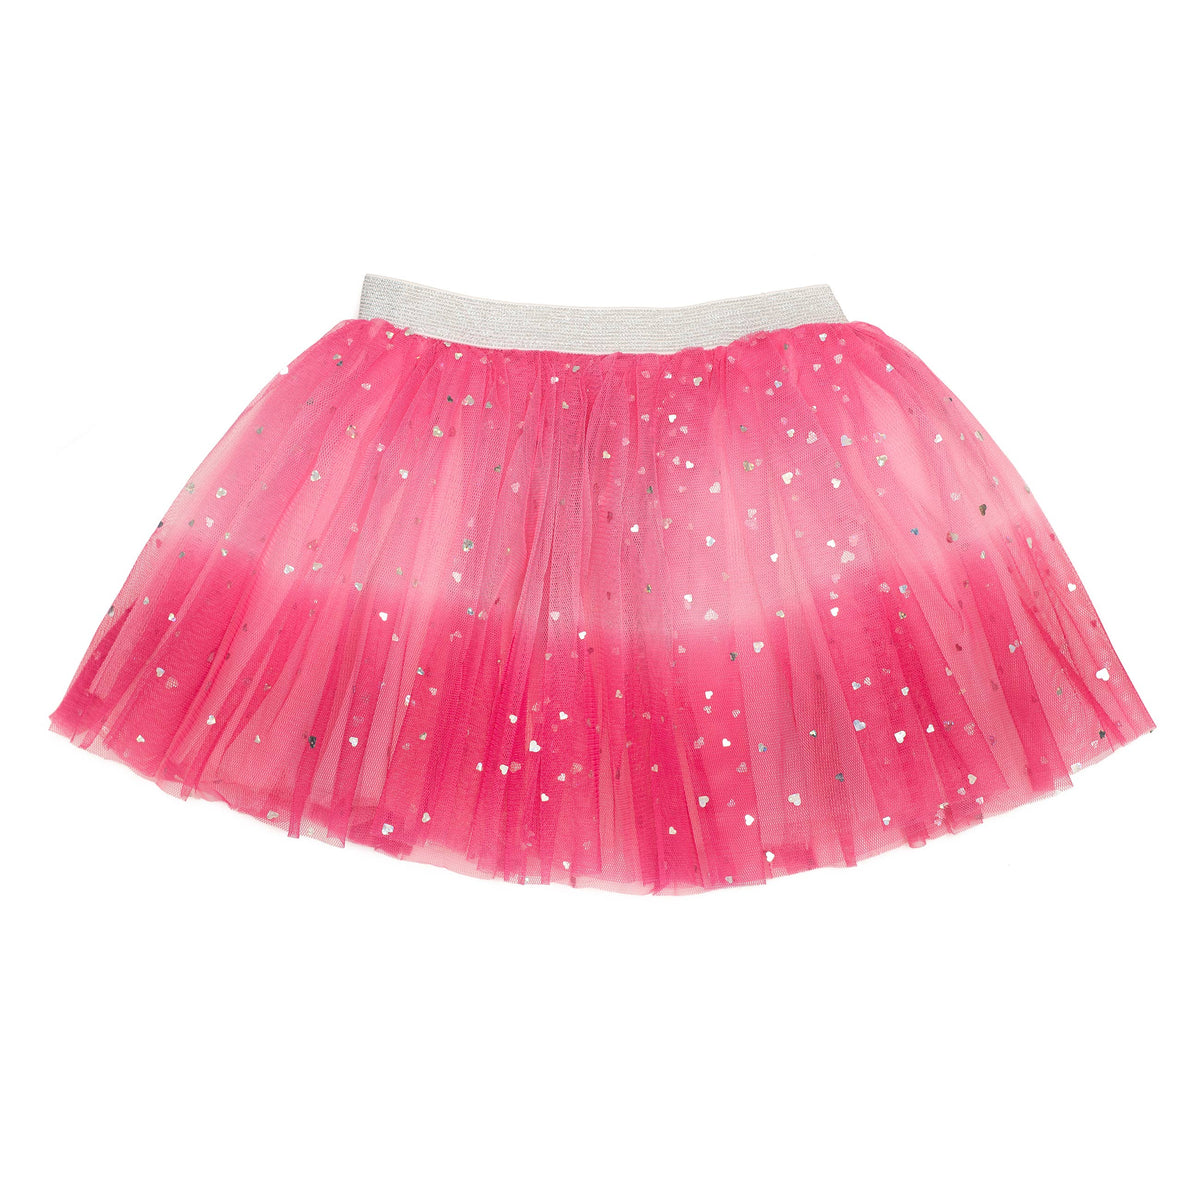 Tutu - Pink Ombre Heart 12-24 month